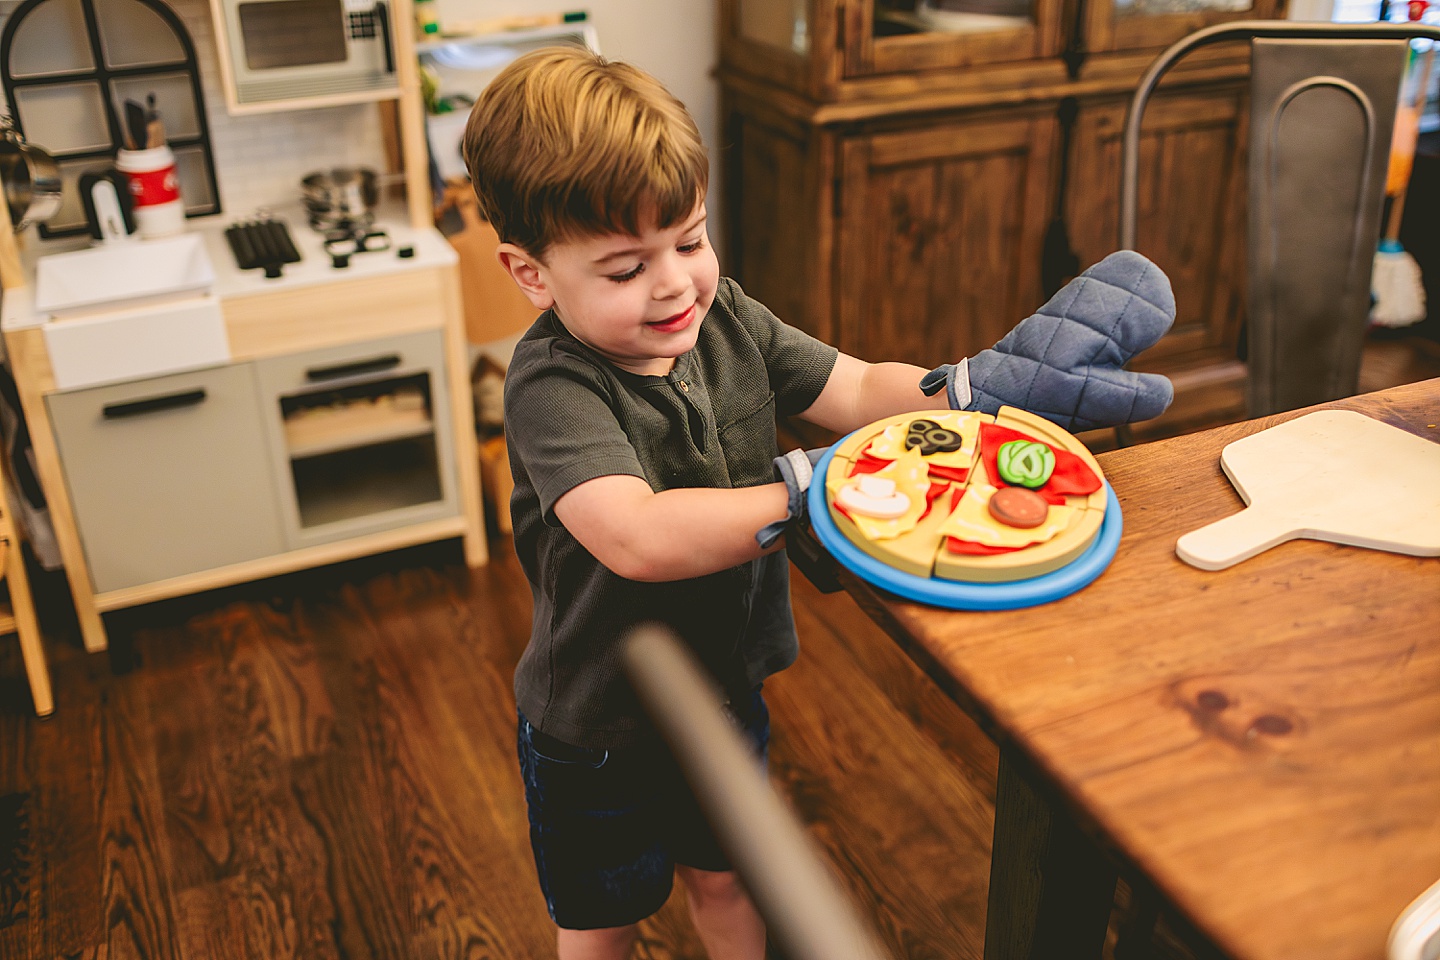 Toddler using play kitchen to make pizza for his family